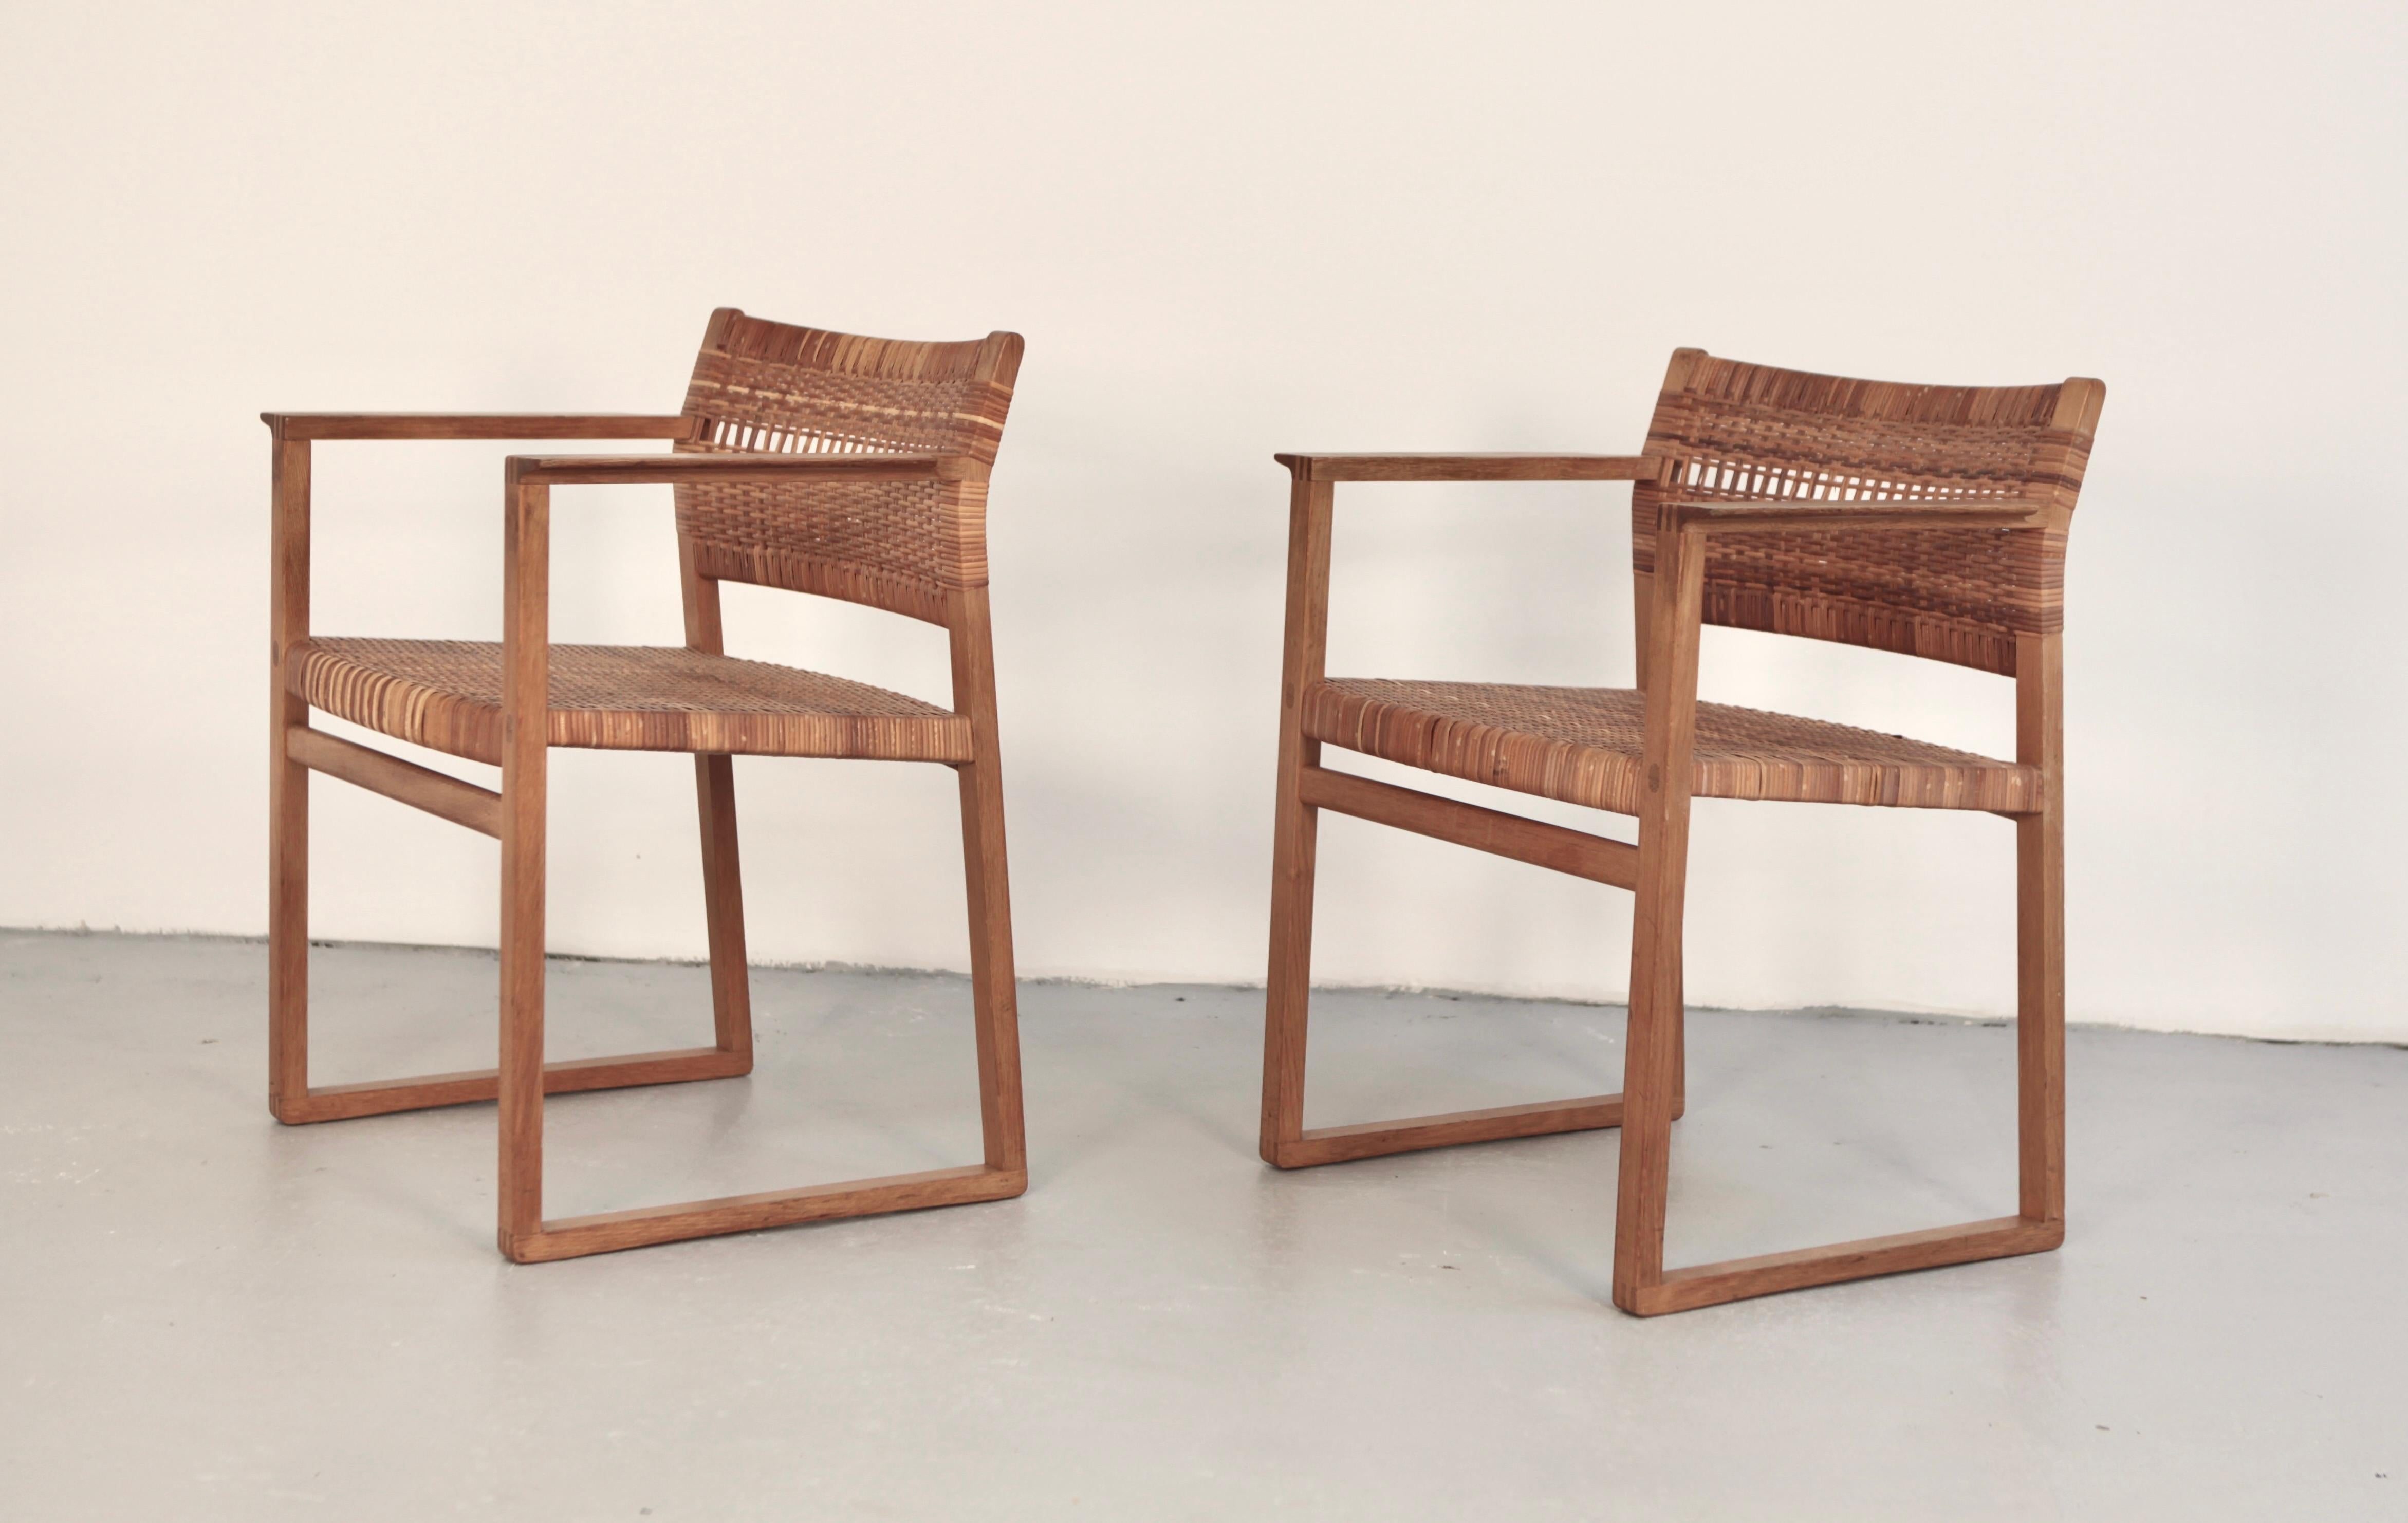 A set of 2 Børge Mogensen dining chairs BM-62 in solid oak and woven cane from 1957.
Manufactured by Frederica Stolefabrik in Denmark.